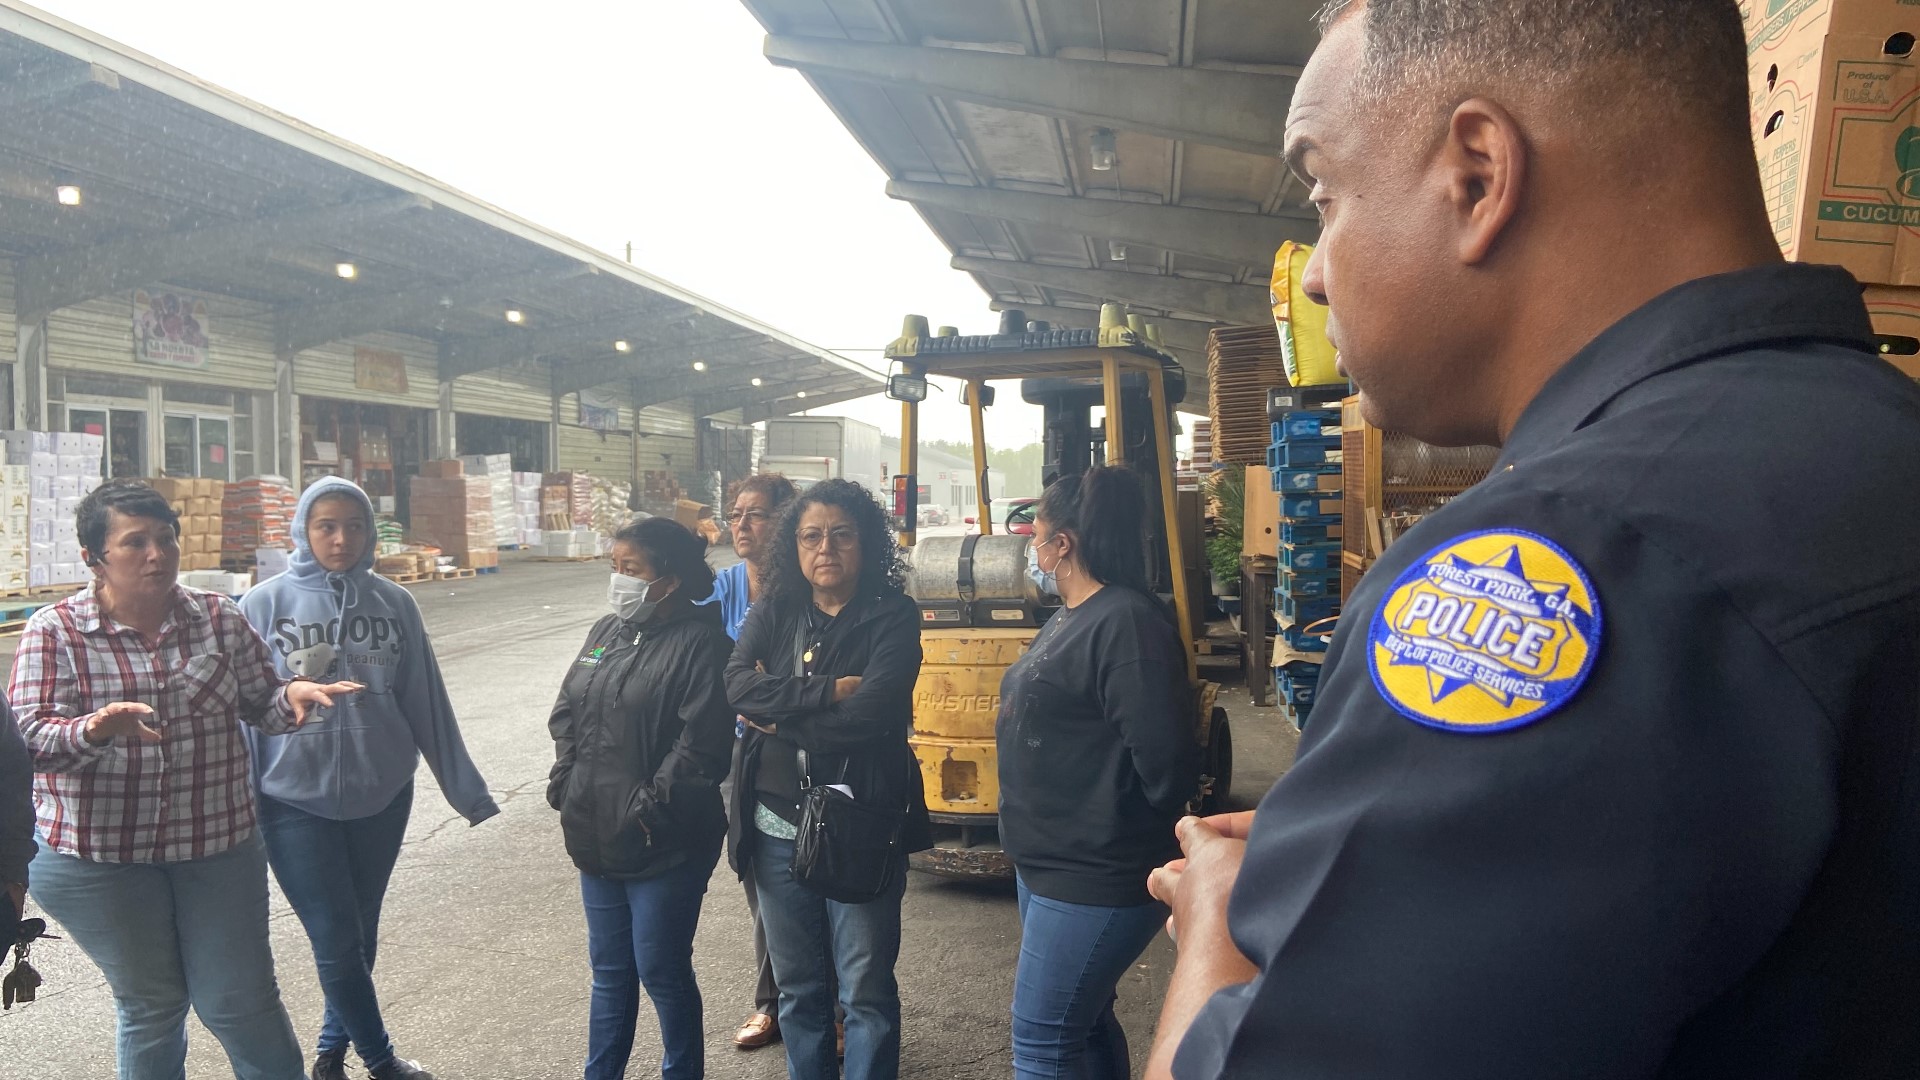 After seeing our story, Forest Park Police responded, and went to the State Farmers Market for our interview, also speaking with frustrated vendors.